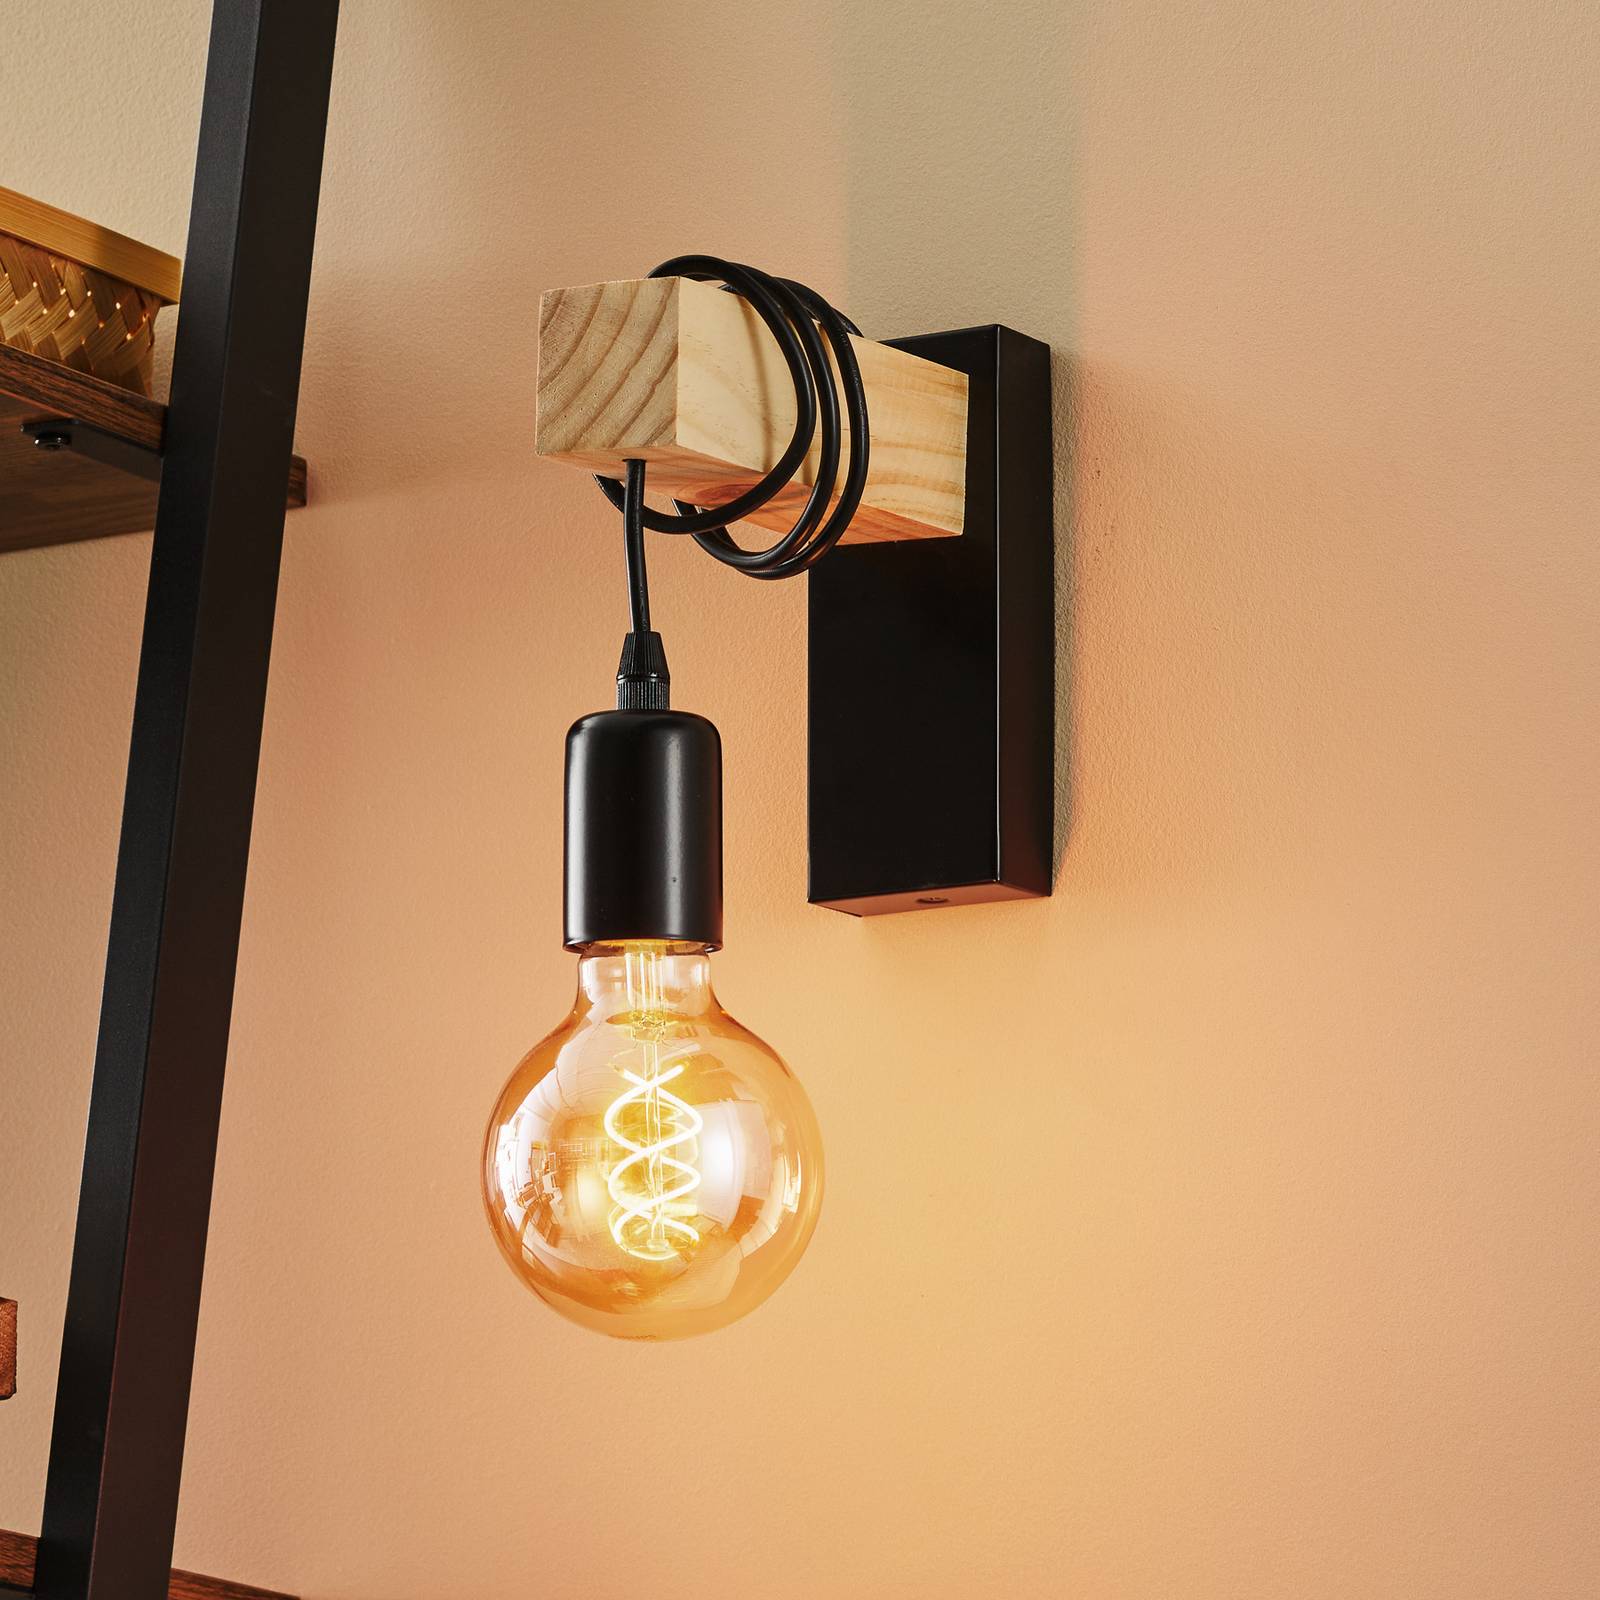 Photos - Chandelier / Lamp EGLO Townshend wall light with a wooden element 